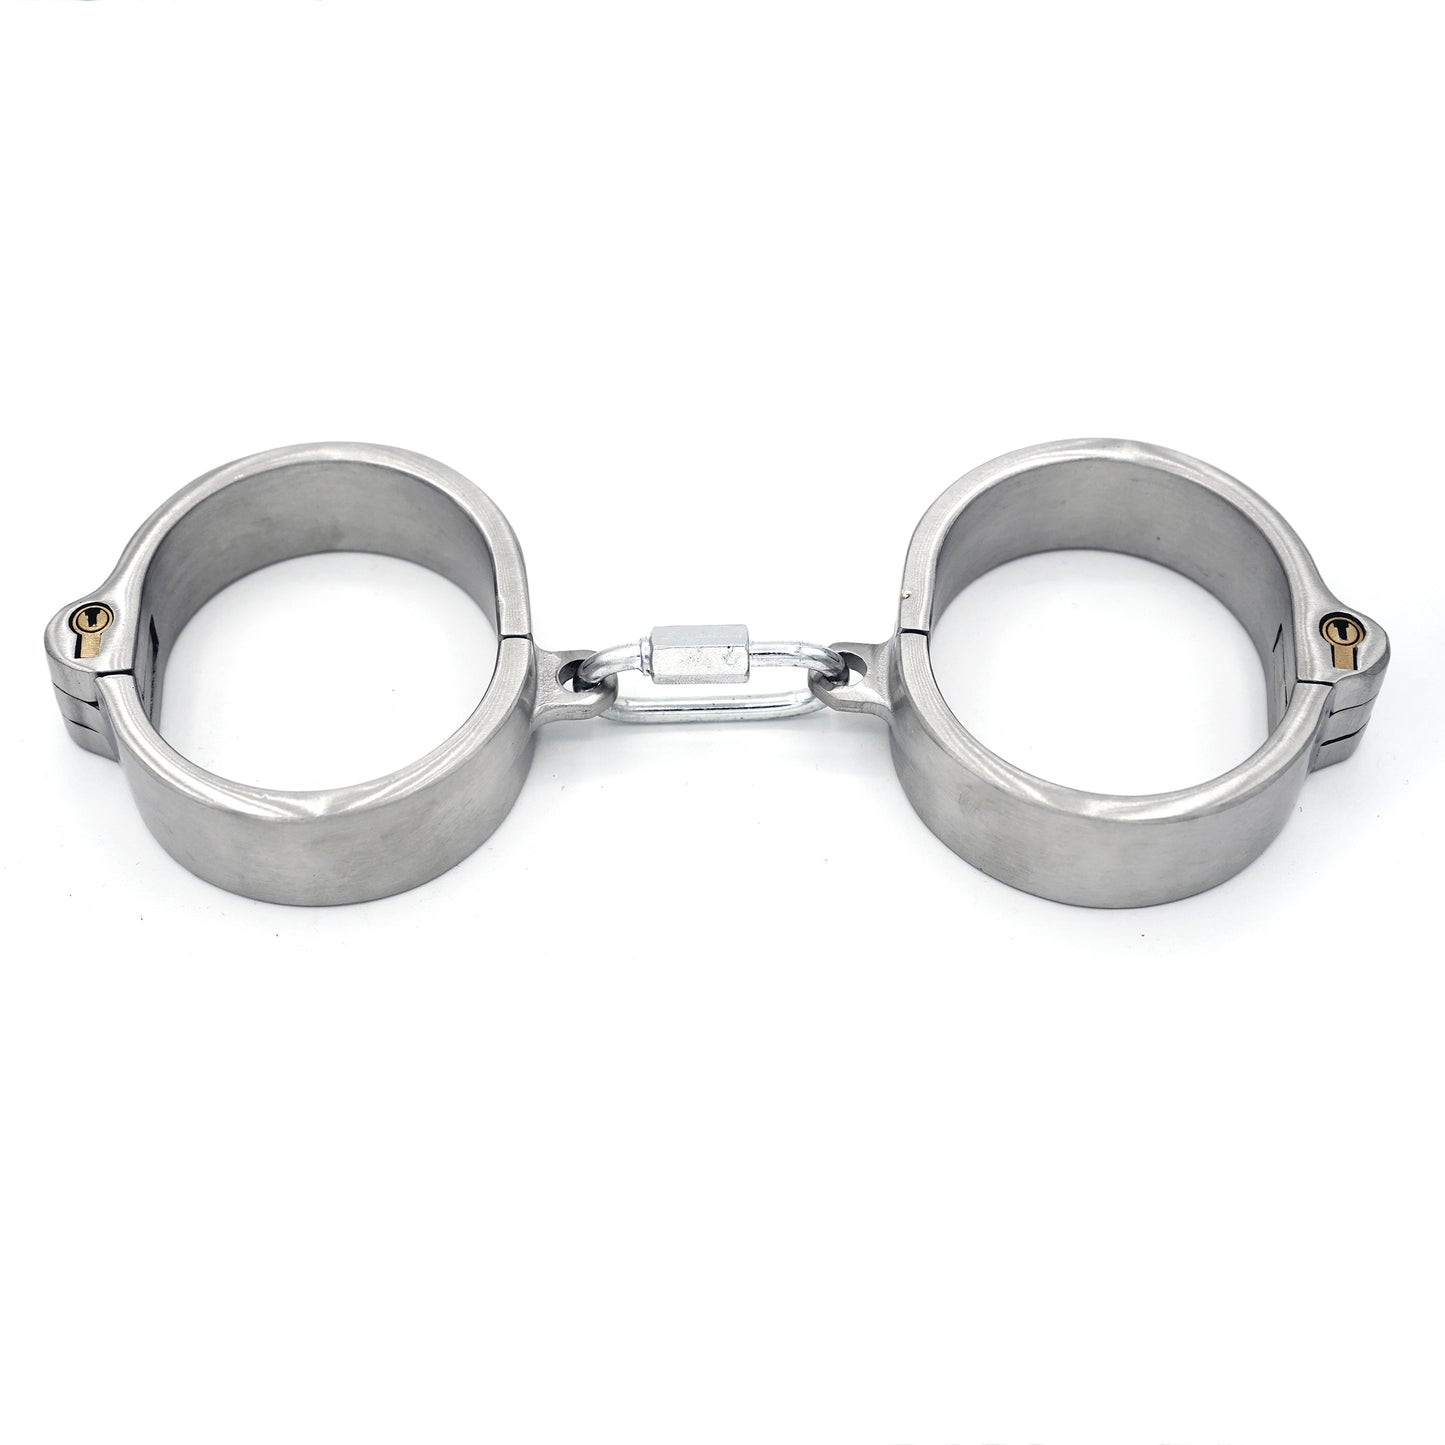 Solid stainless steel shackles with key lock and link